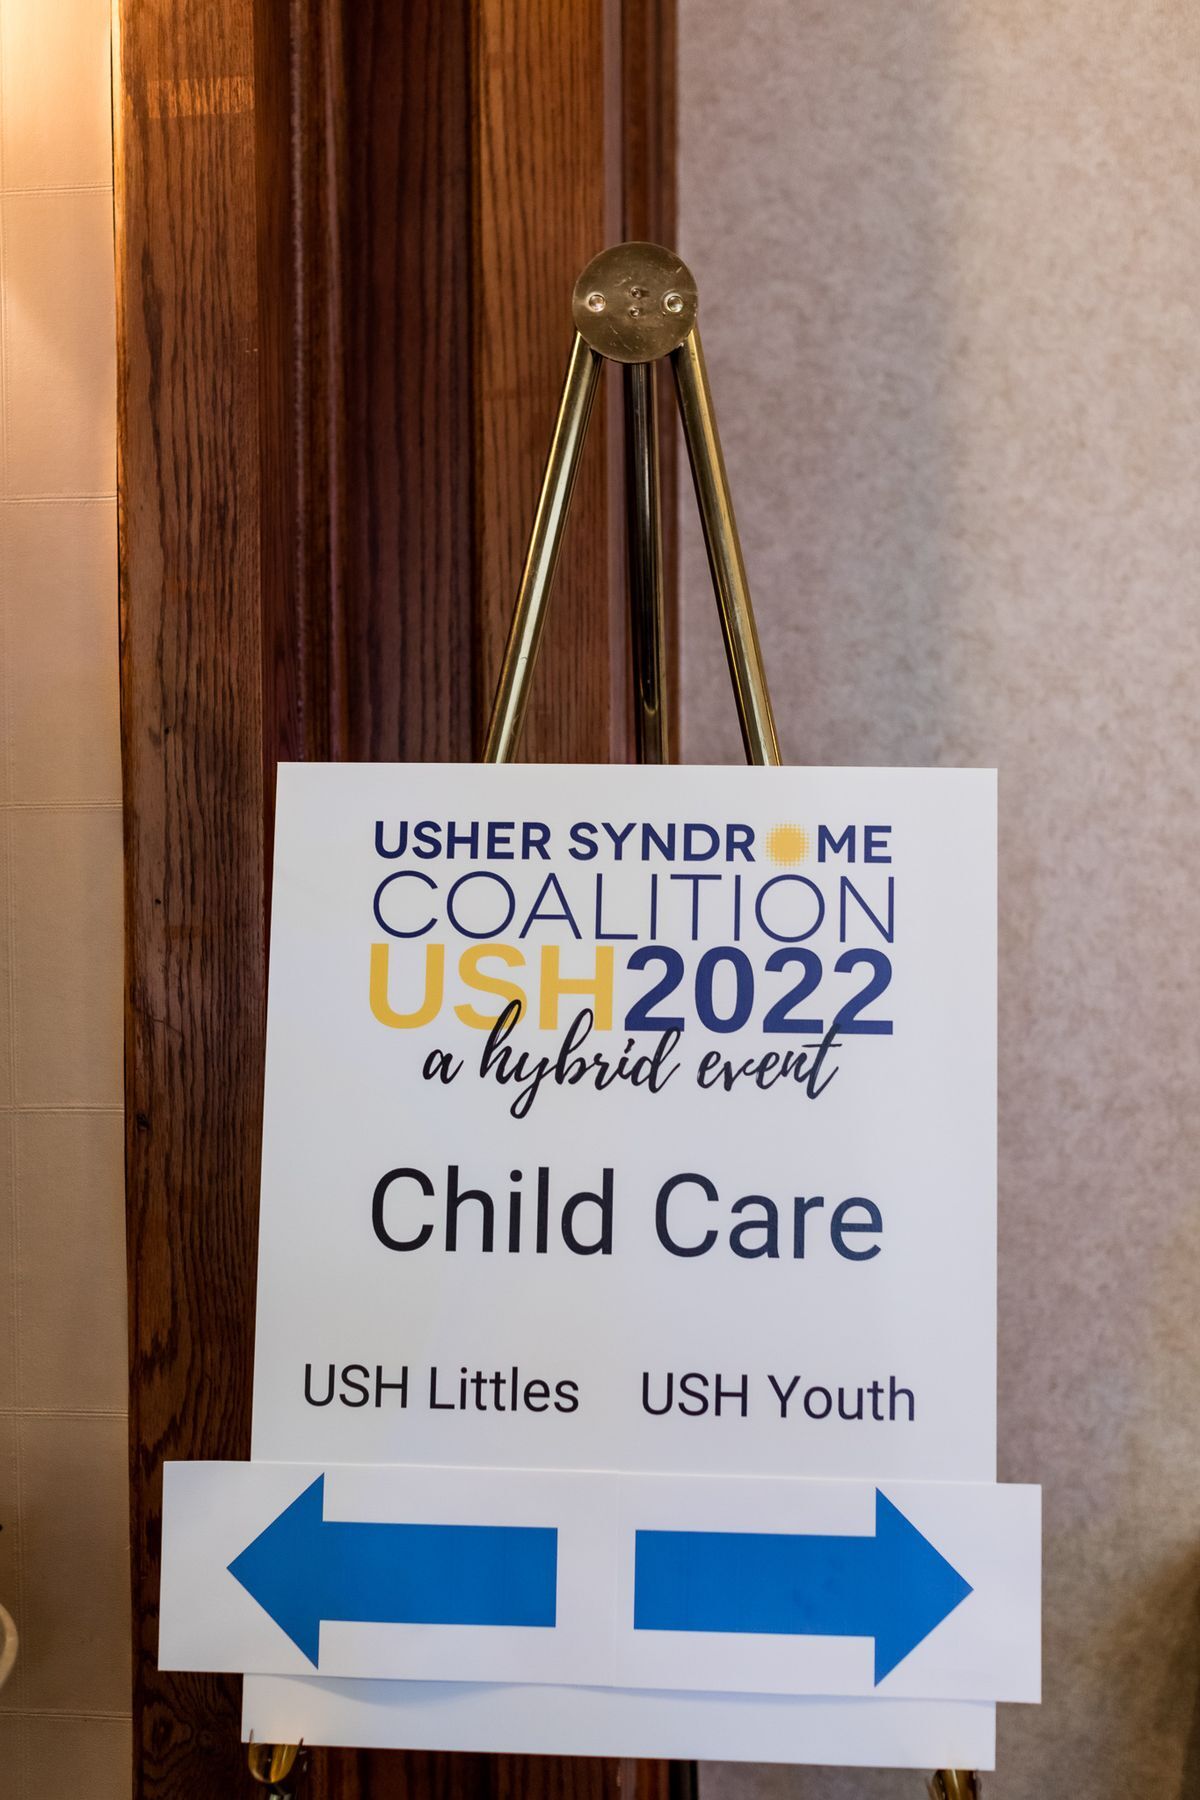 A sign that says Child Care. Two arrows point in opposite directions. One arrow points to the left for USH Littles, the other arrow pointing to the right is for USH Youths.